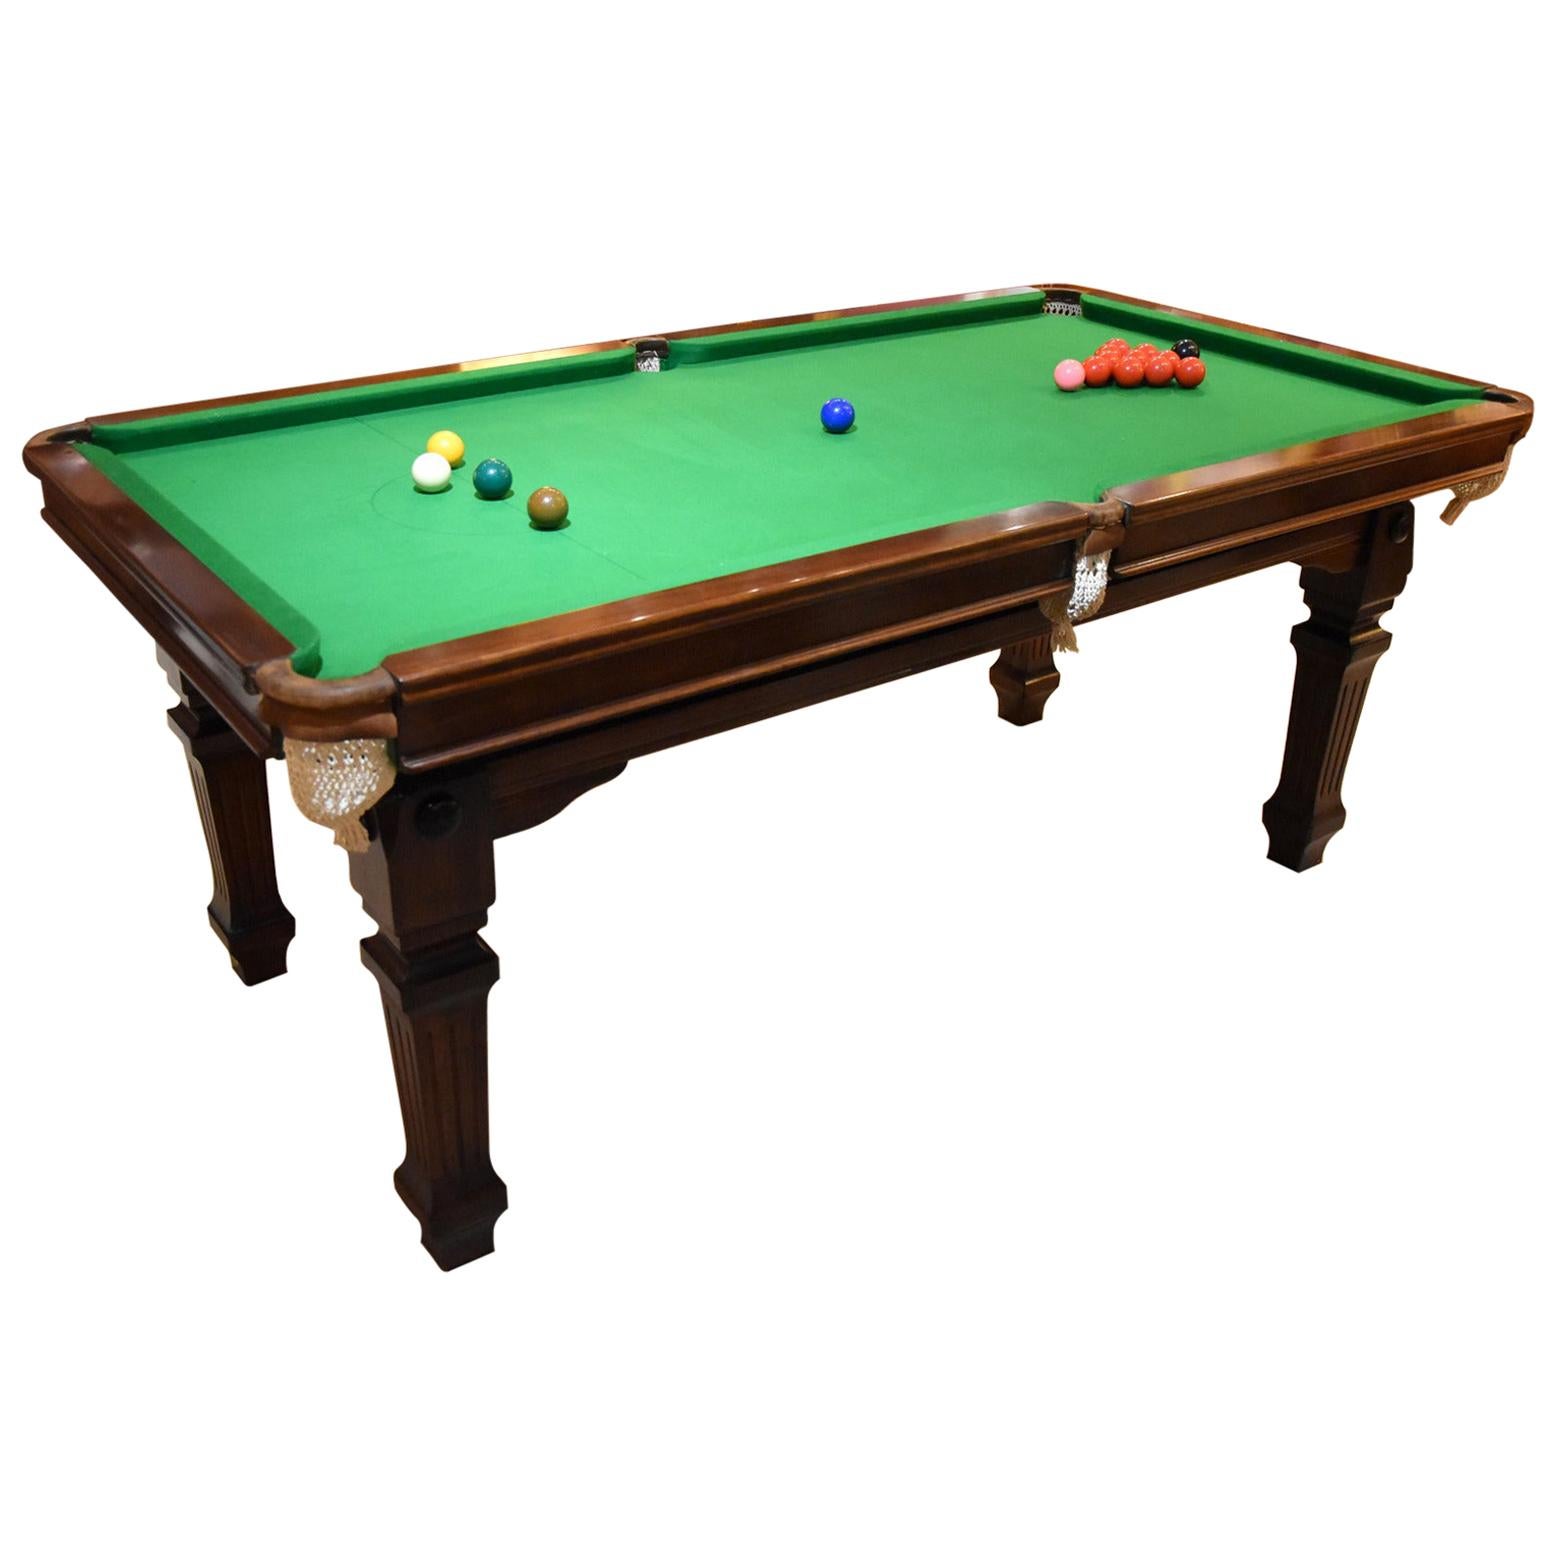 Elegant Edwardian Metamorphic Snooker Table by Riley and Sons For Sale